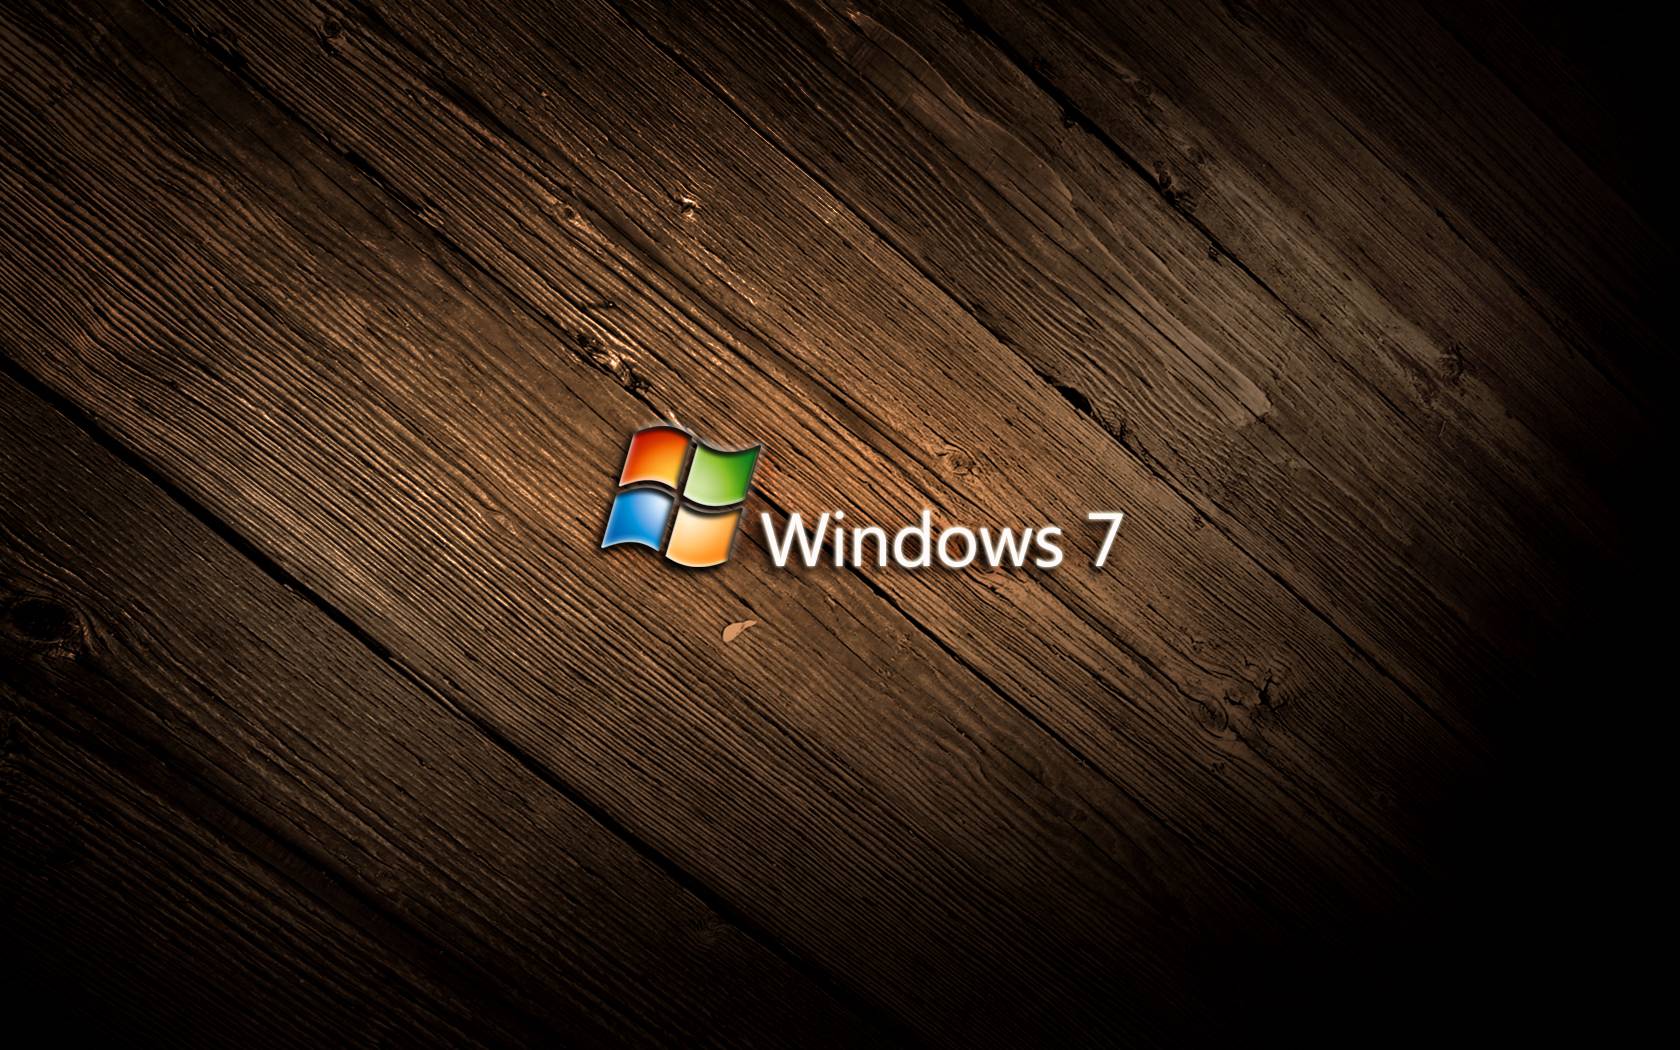 June 28, 2015 Hd For Windows 7 HD Backgrounds for PC Full HDQ